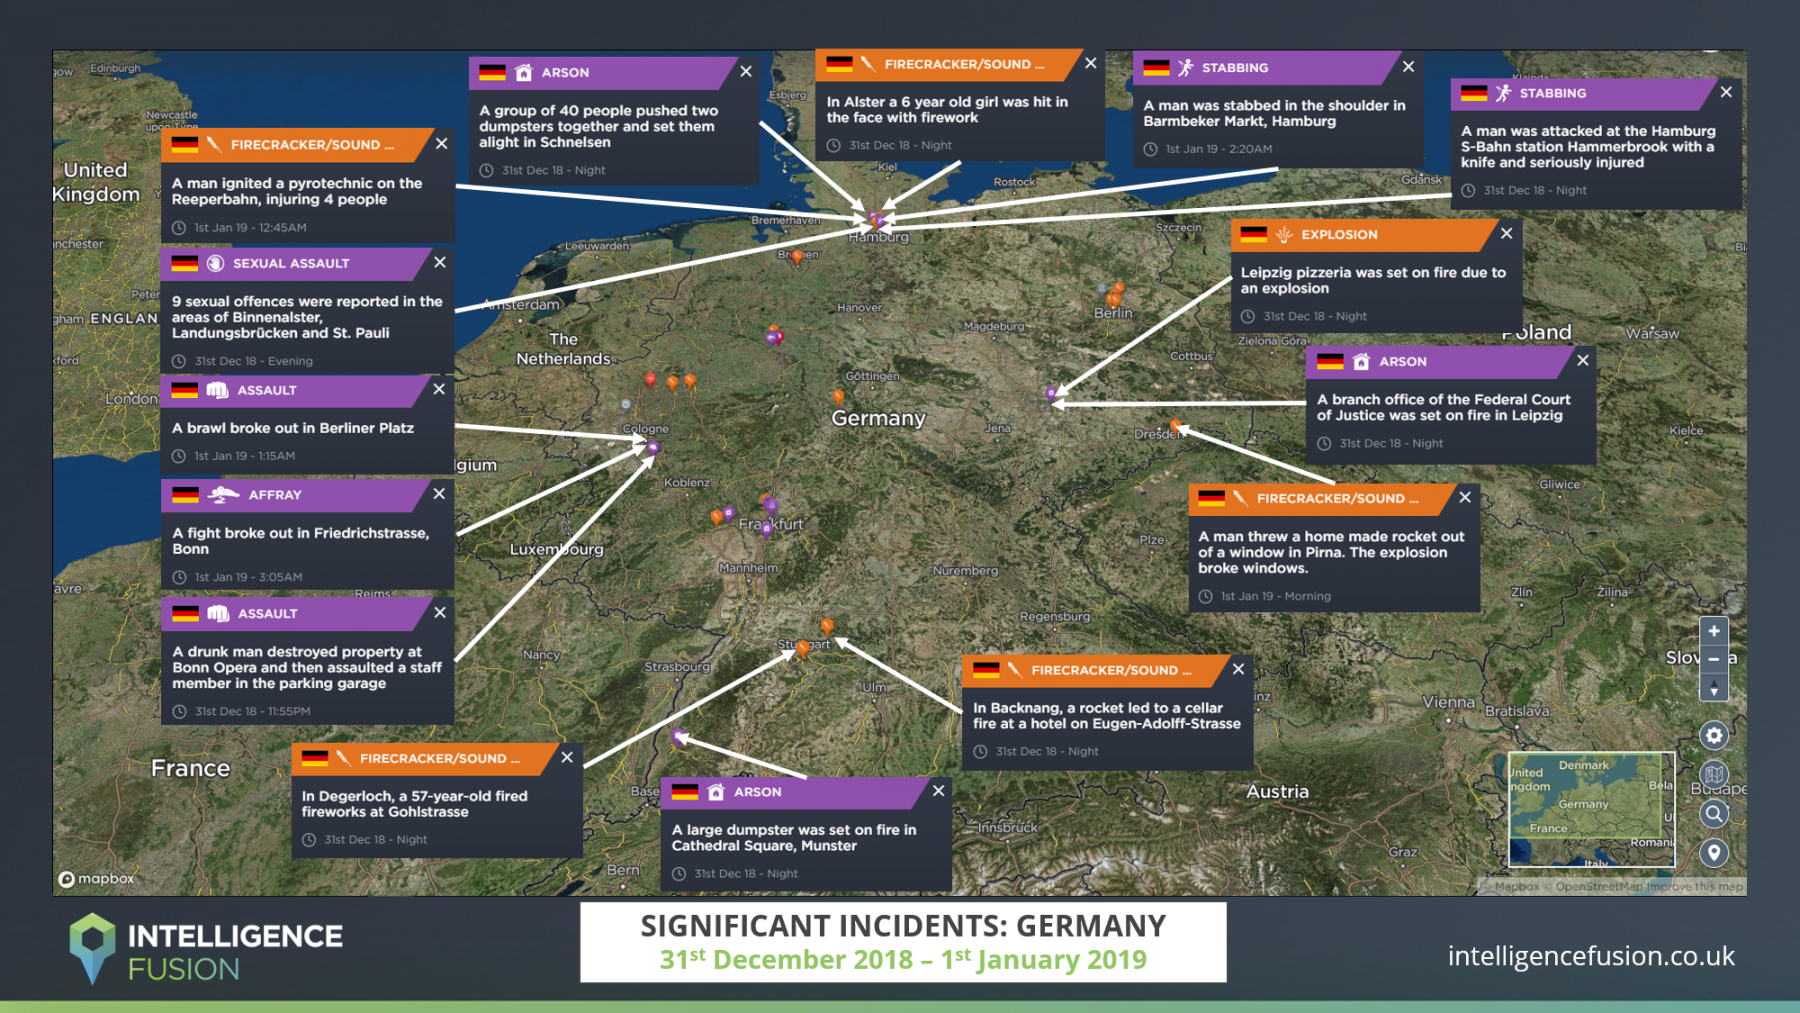 Crime and incidents reported across Germany on New Year's Eve 2018/19